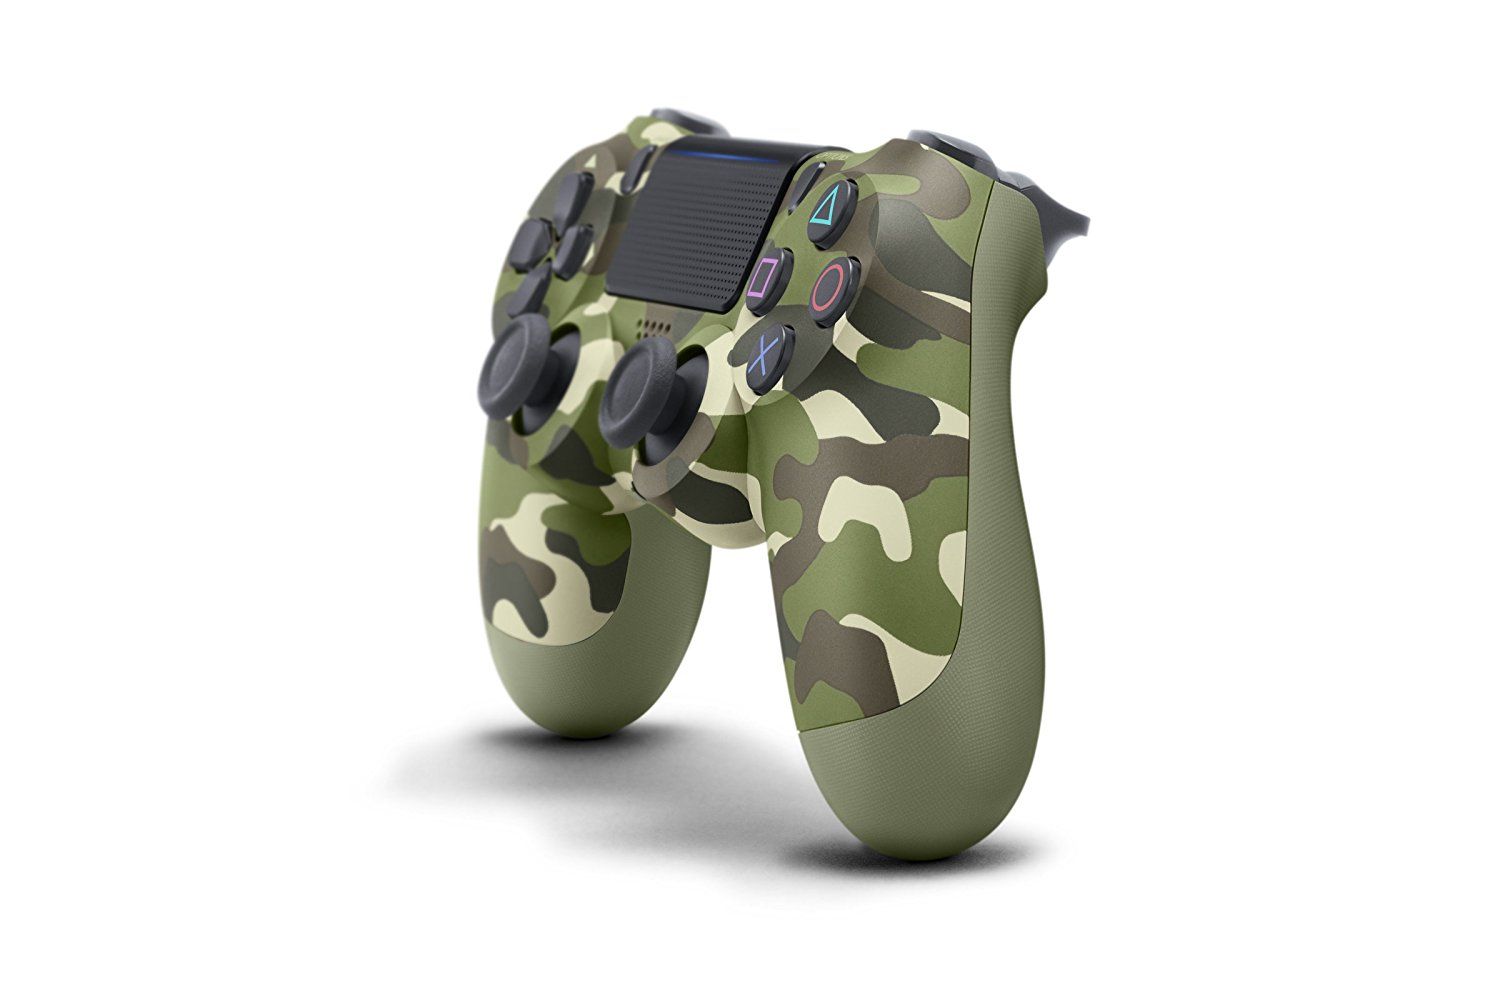 10 amazing custom-themed PS4 controllers that you need to own